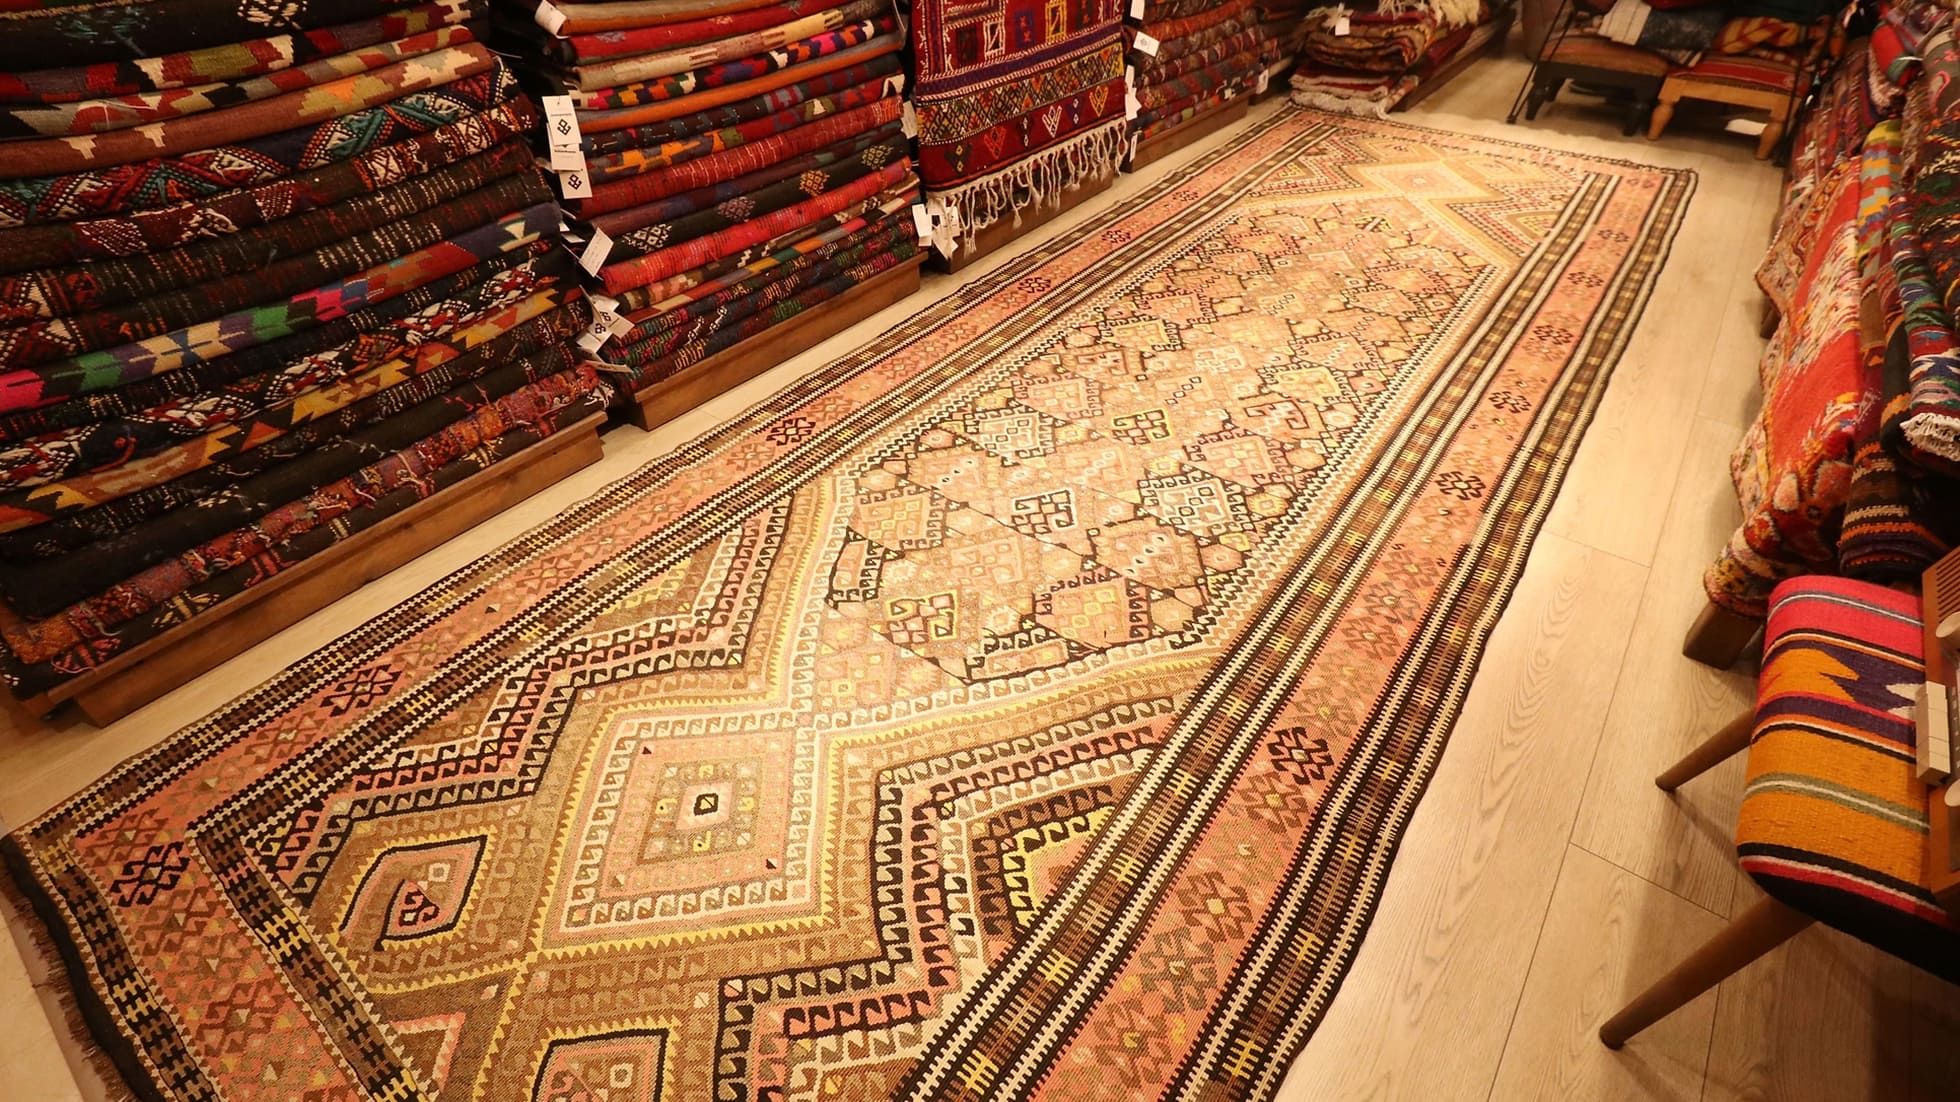 traditional Oushak runner Kilim Rug is displayed in a rug store in NYC